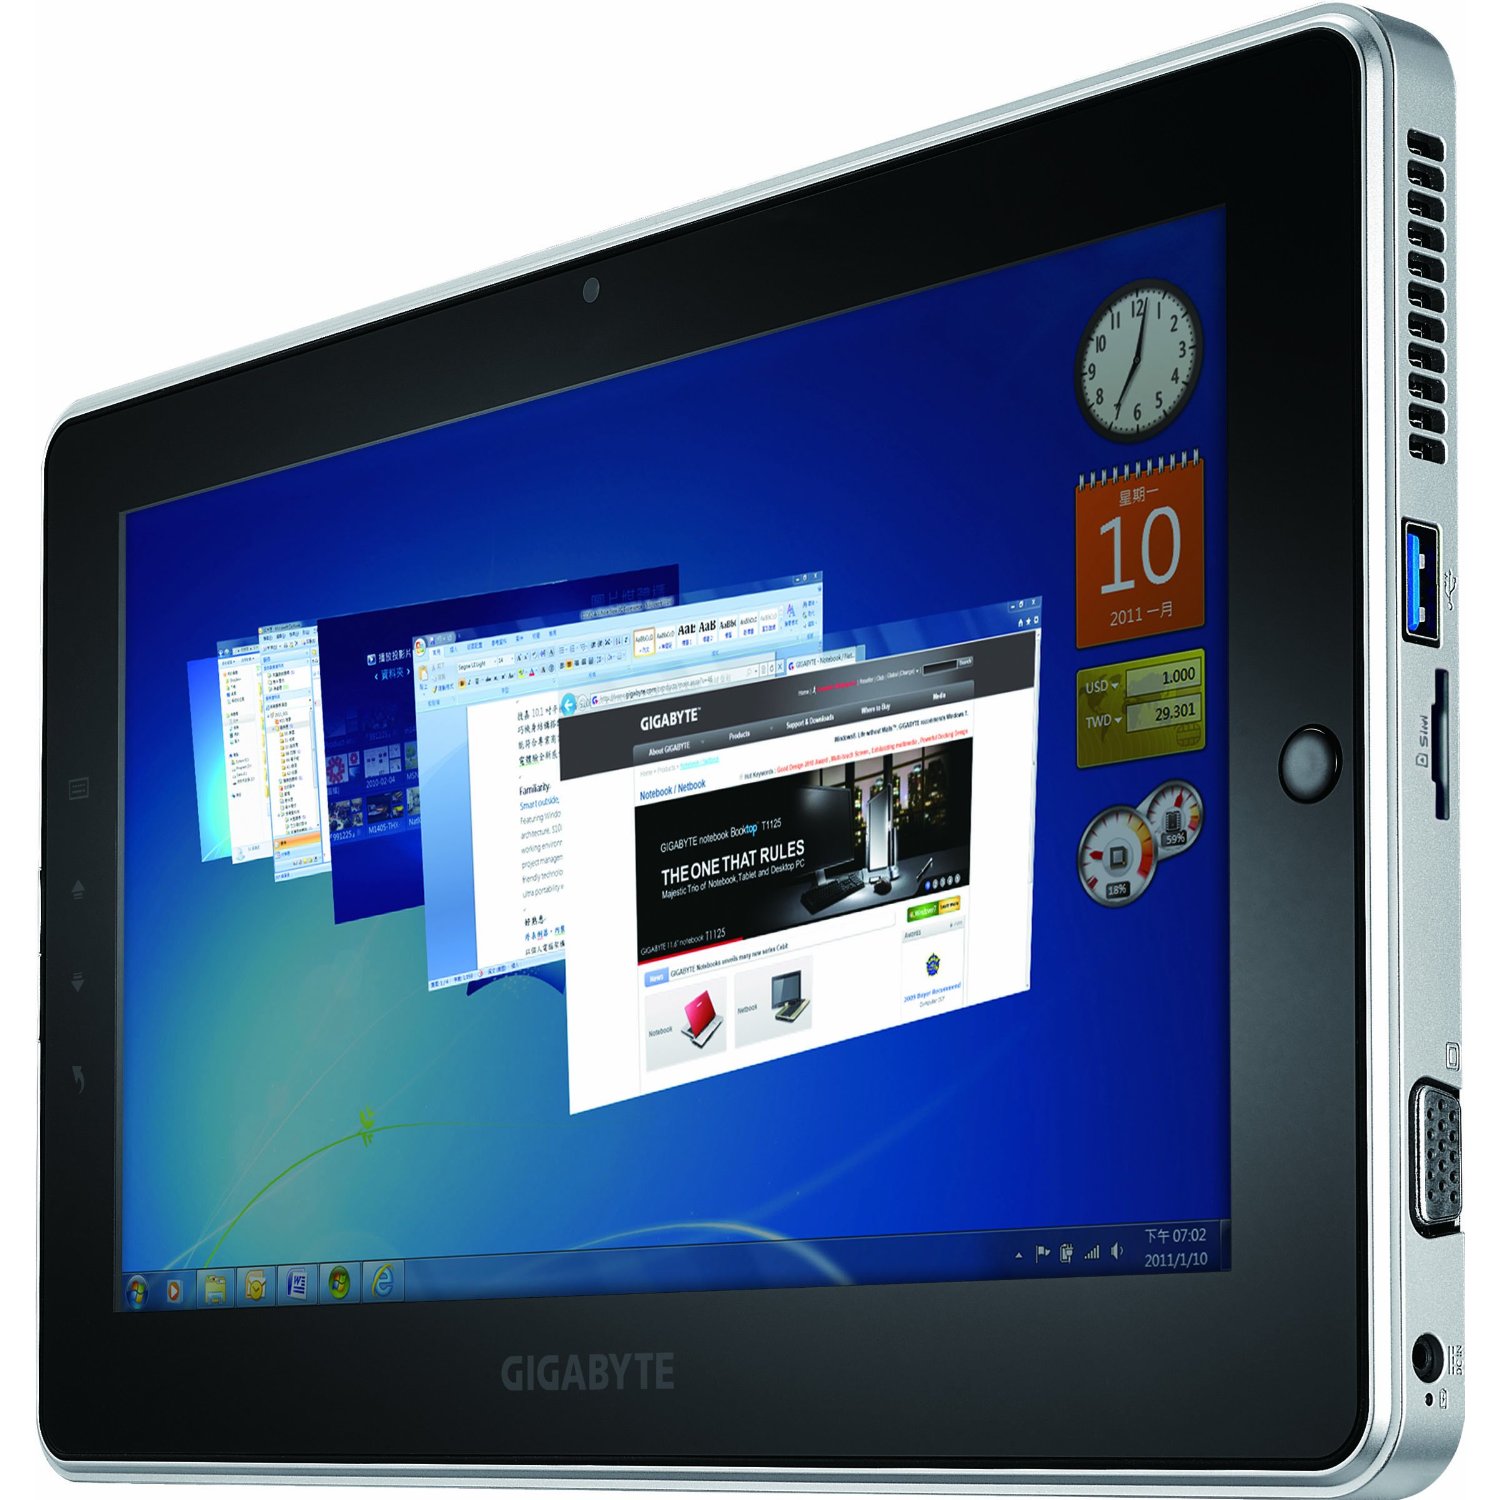 http://thetechjournal.com/wp-content/uploads/images/1202/1328624359-gigabyte-s1080-101inch-tablet-pc-powered-by-windows-7-5.jpg